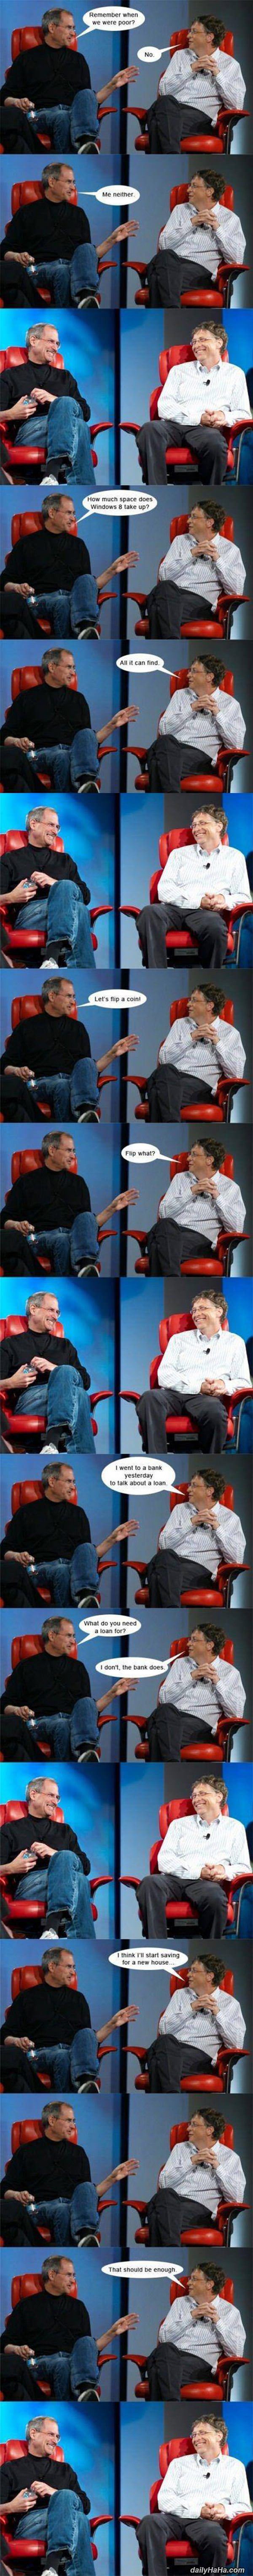 steve jobs and bill gates funny picture